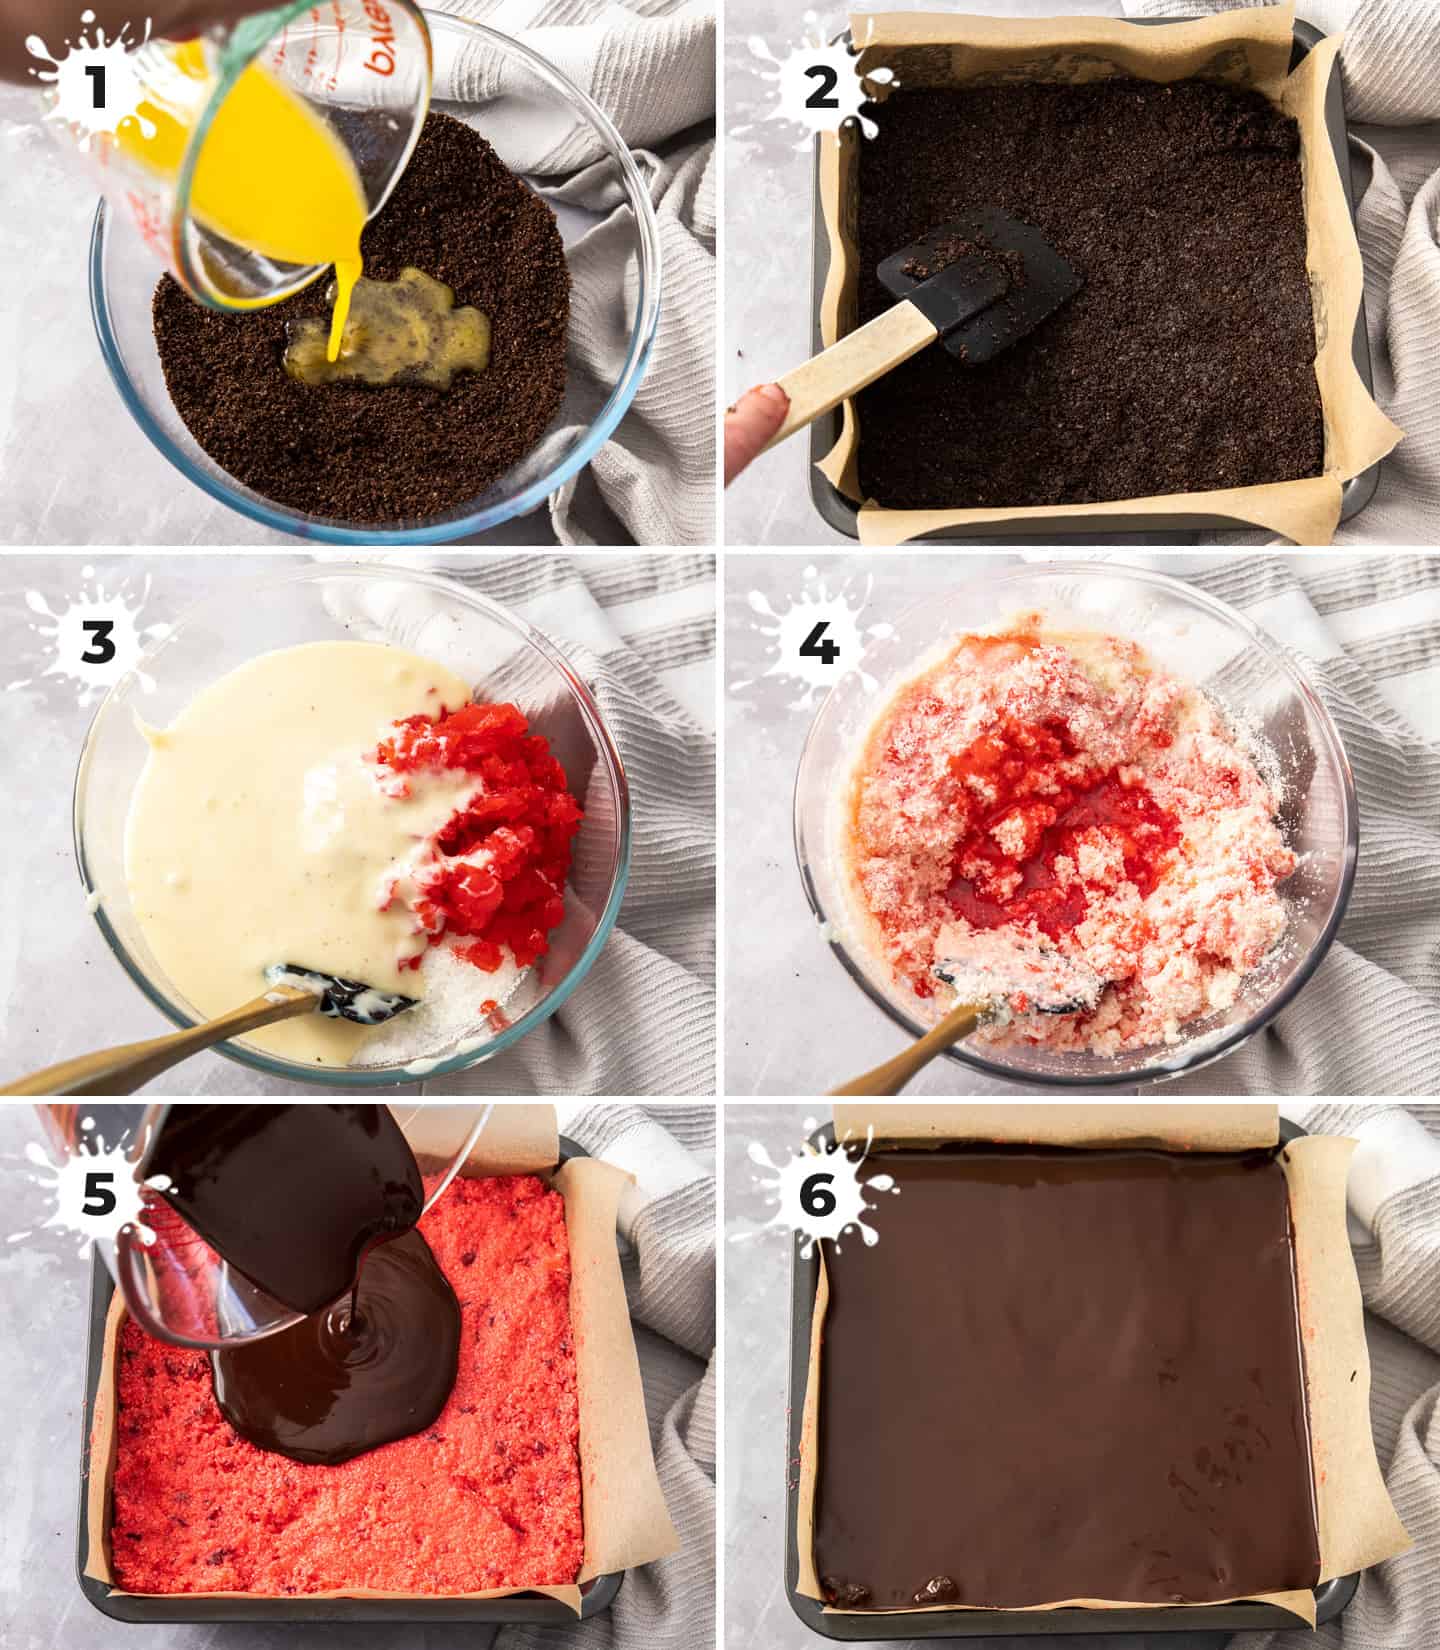  A collage of 6 images showing how to mix together and assemble the ingredients.